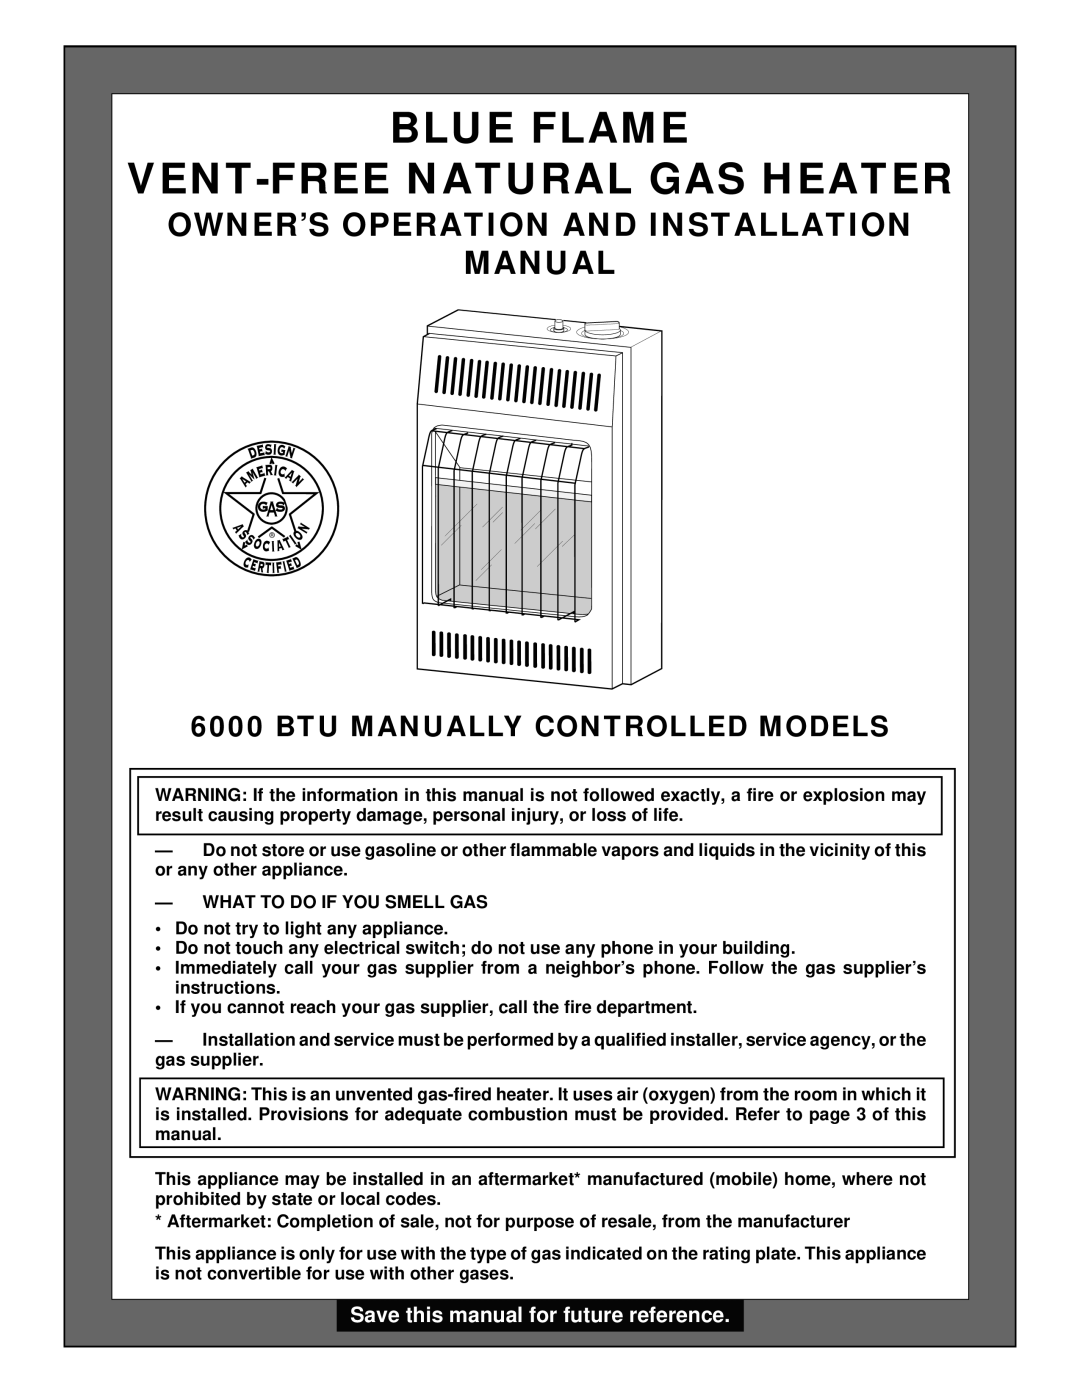 Desa BLUE FLAME VENT-FREE NATURAL GAS HEATER installation manual Owner’S Operation And Installation Manual 